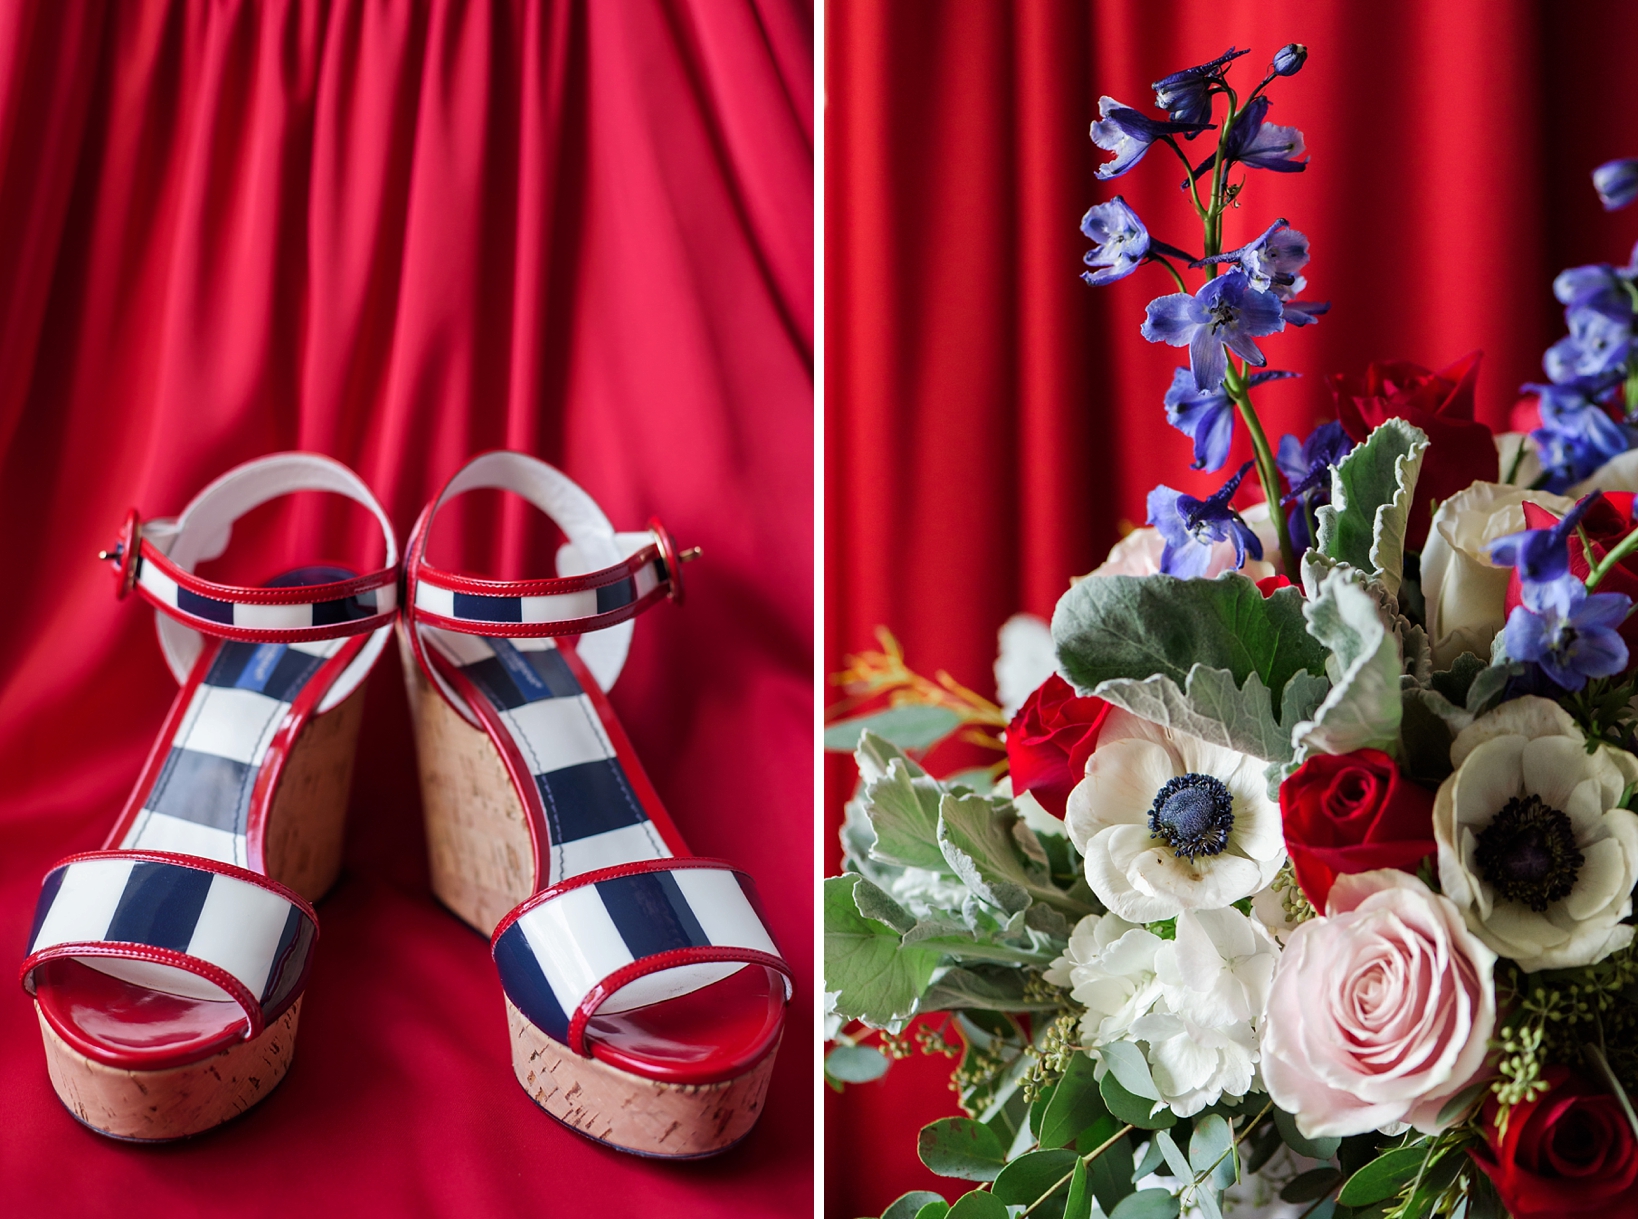 Brides wedding shoes and closeup of the floral bouquet against the red dress of a bridesmaid